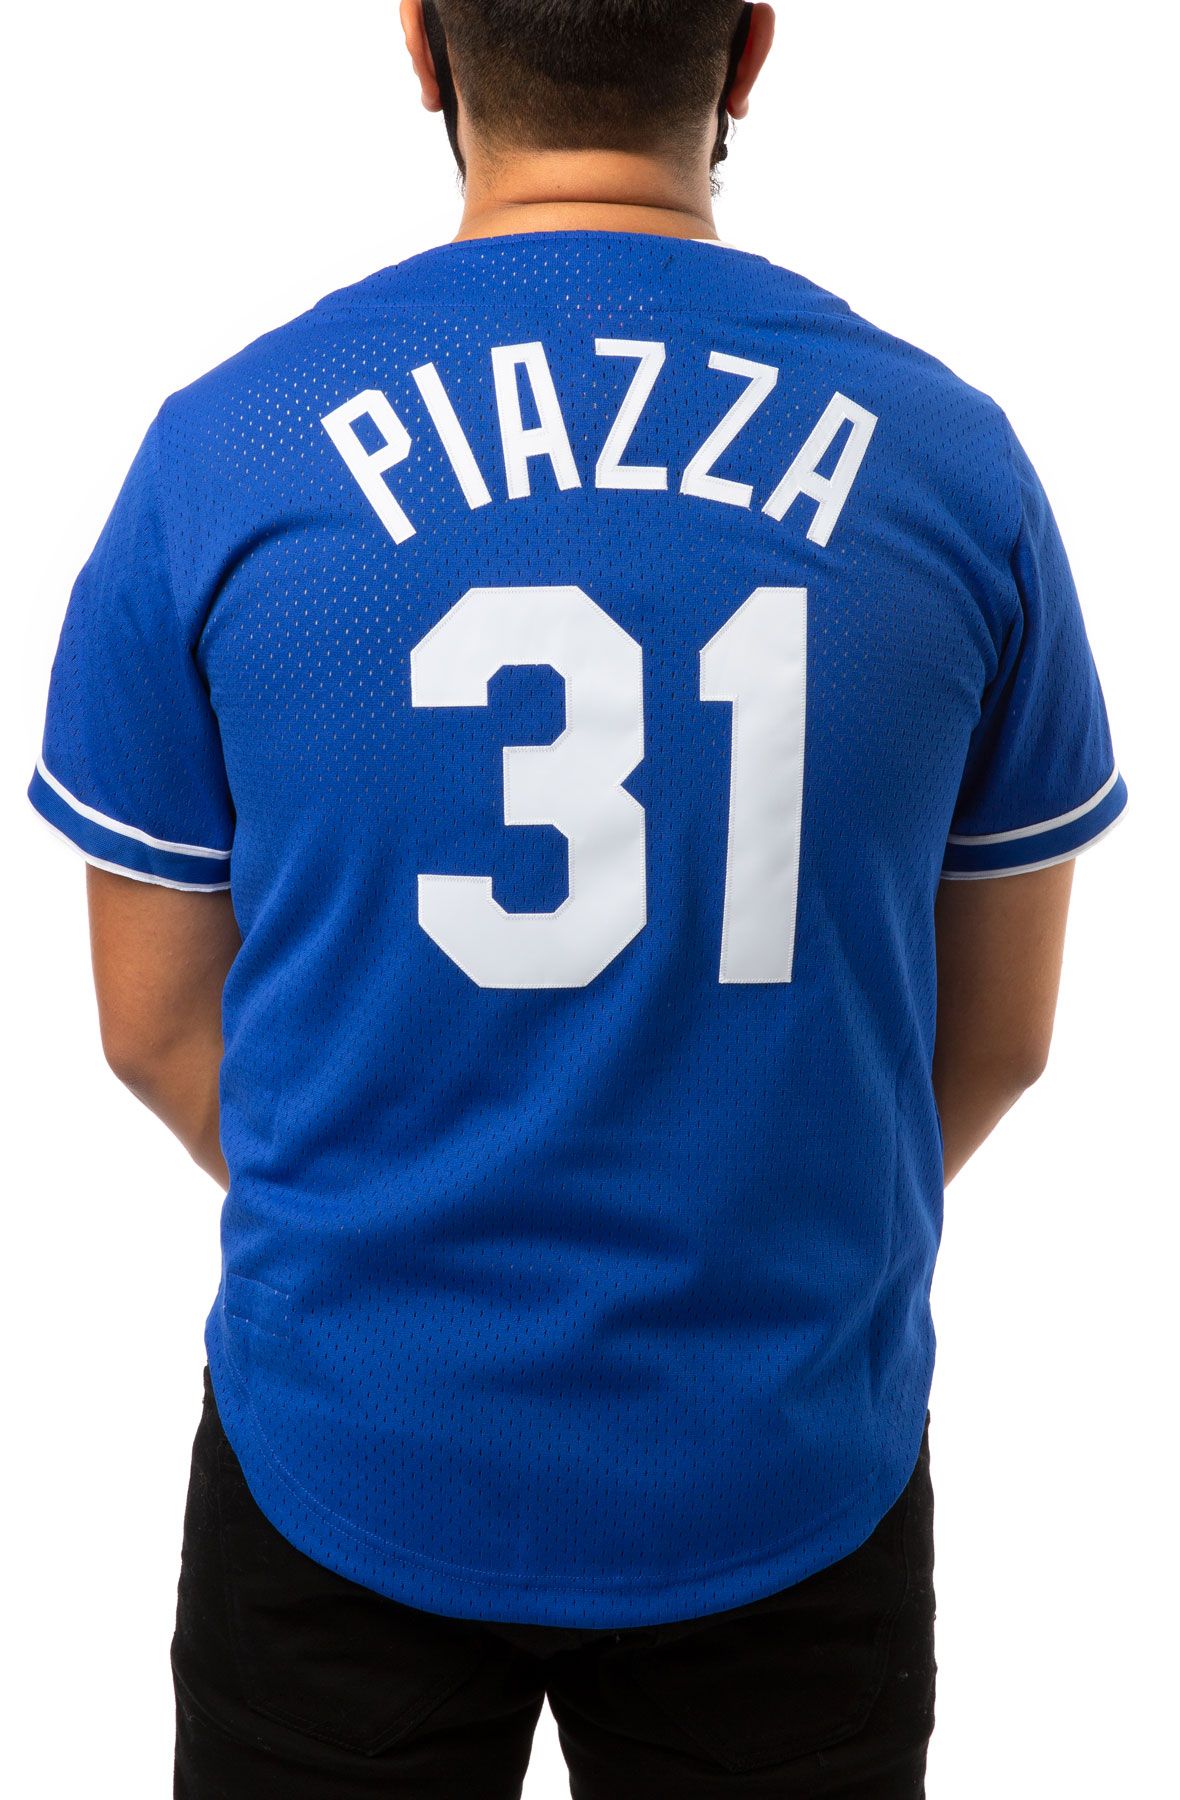 MITCHELL AND NESS Los Angeles Dodgers 1997 Mike Piazza Authentic BP Jersey  ABBFGS18312-LADROYA97MPI - Shiekh